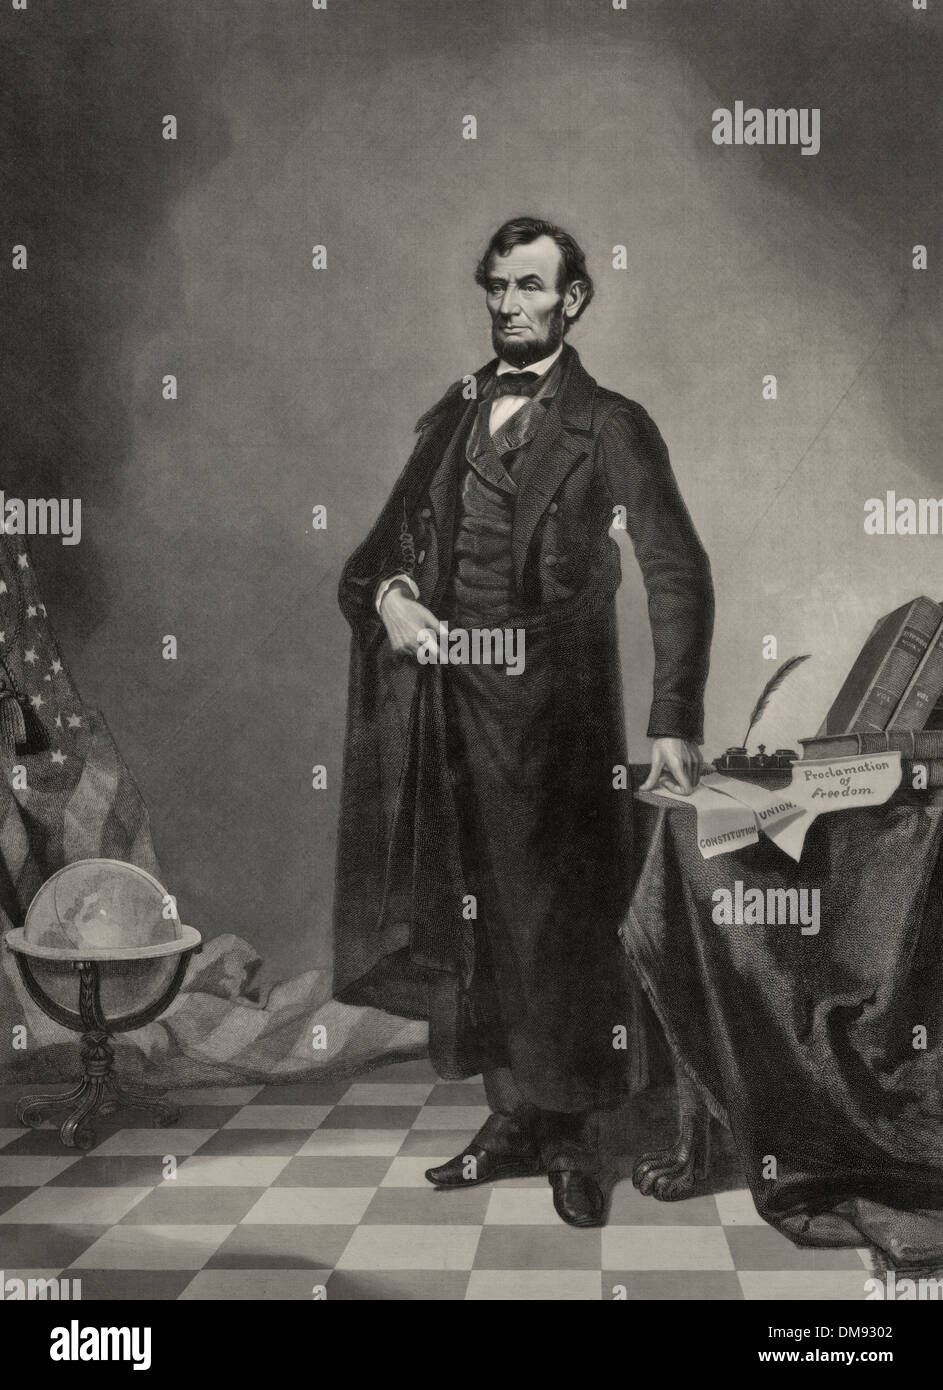 Abraham Lincoln - 16th President of the United States of America, 1861 - 1865 Stock Photo